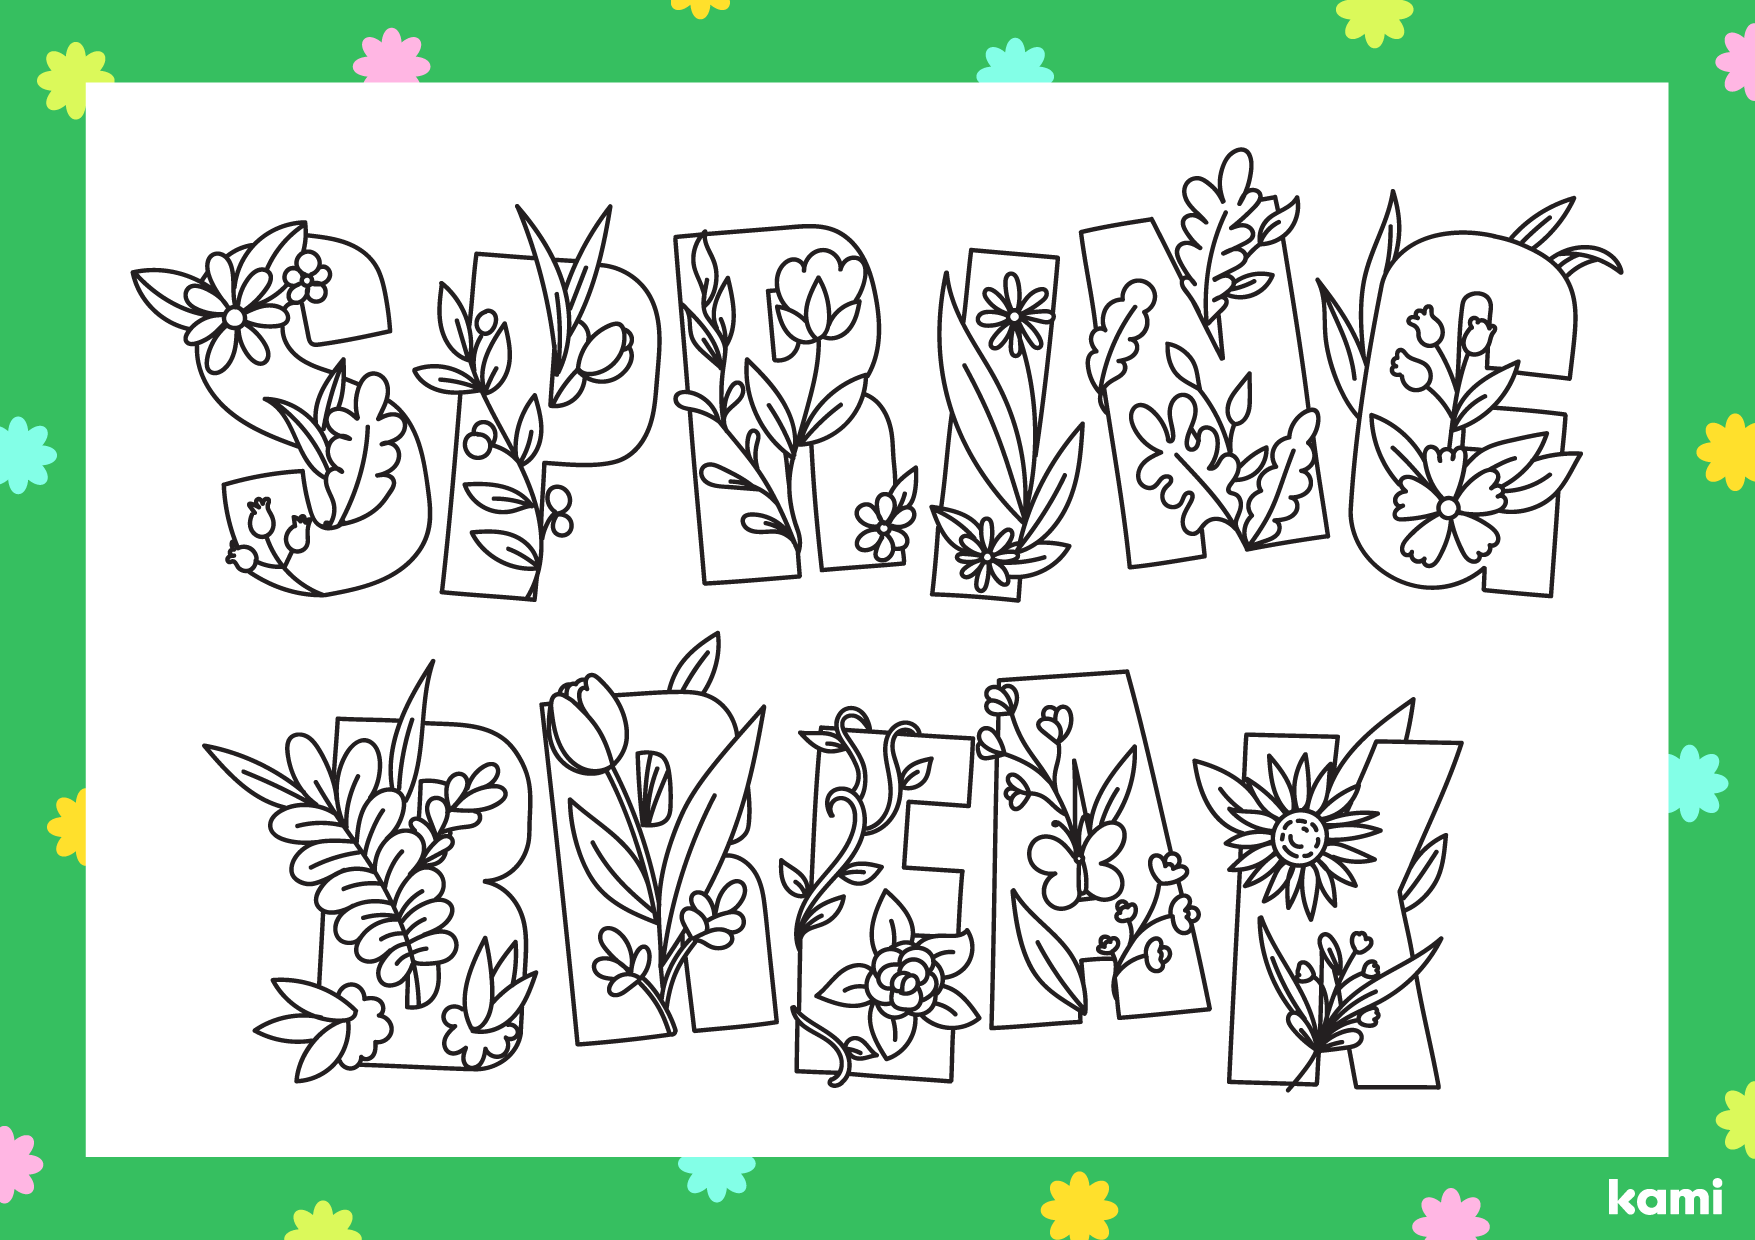 Spring Break Coloring Sheet For Teachers Perfect For Grades 1st 2nd